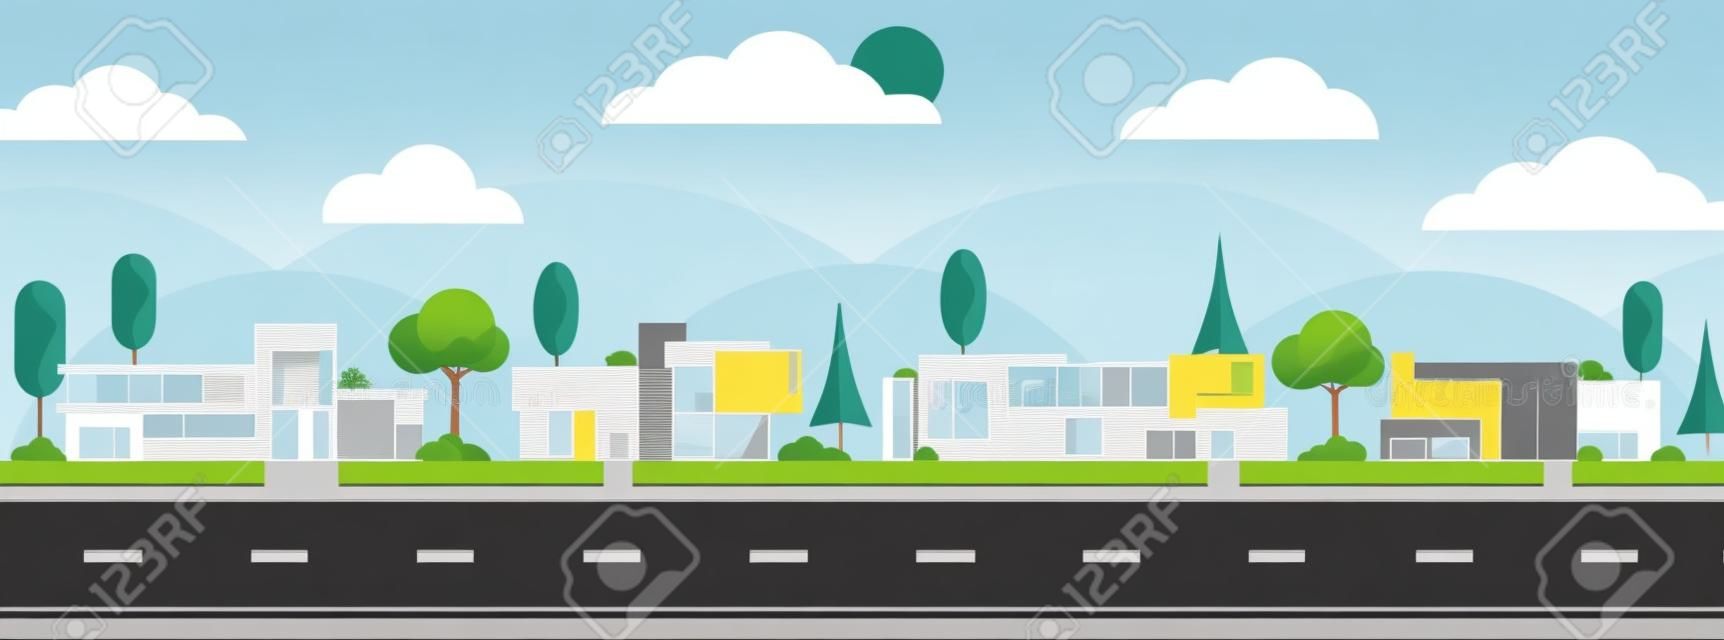 Landscape of modern houses with tree and clouds and along the roads, Modern building and architecture along the roads, Flat home vector illustration.